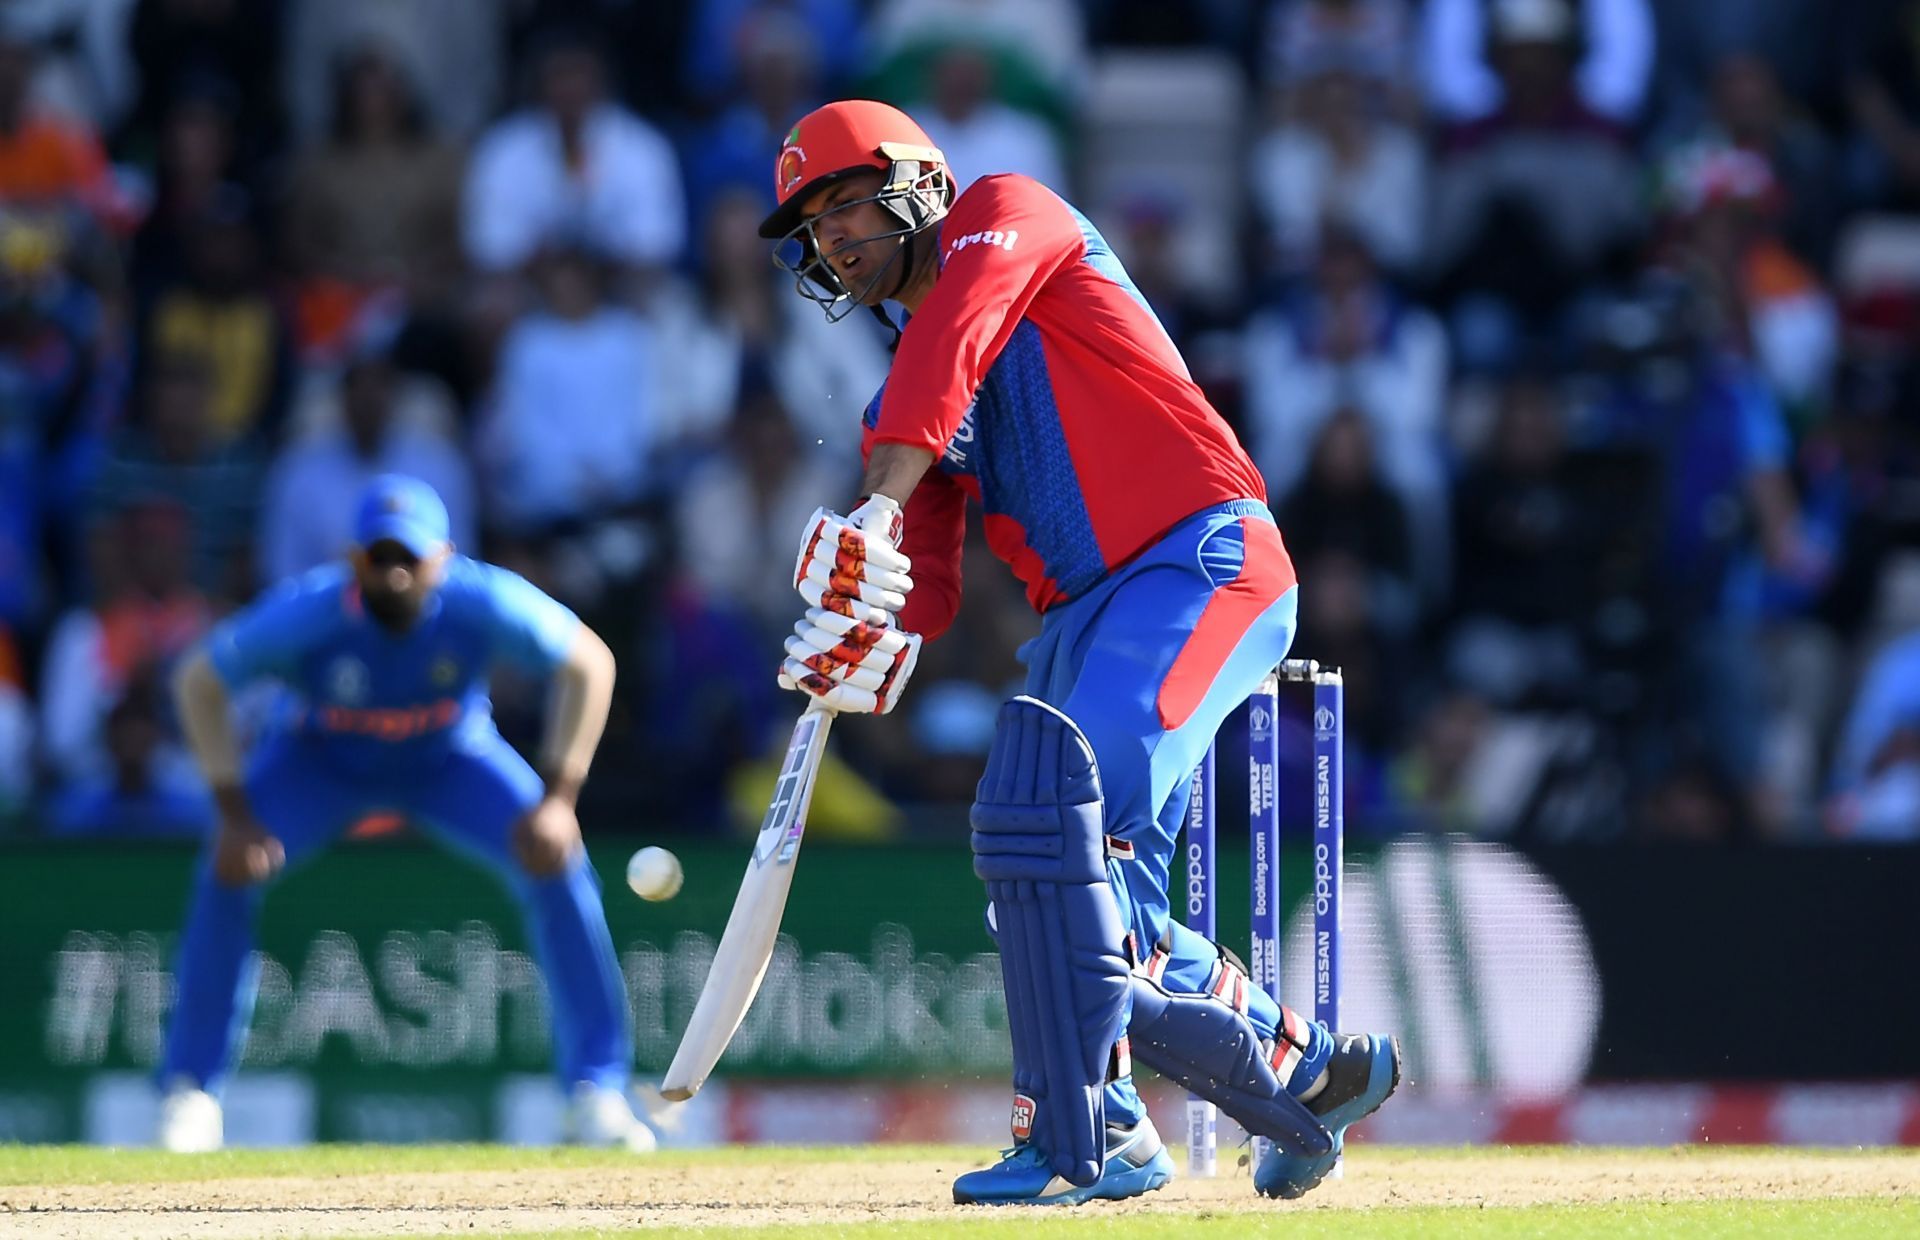 India will be wary of the all-round prowess of Afghanistan skipper Mohammad Nabi